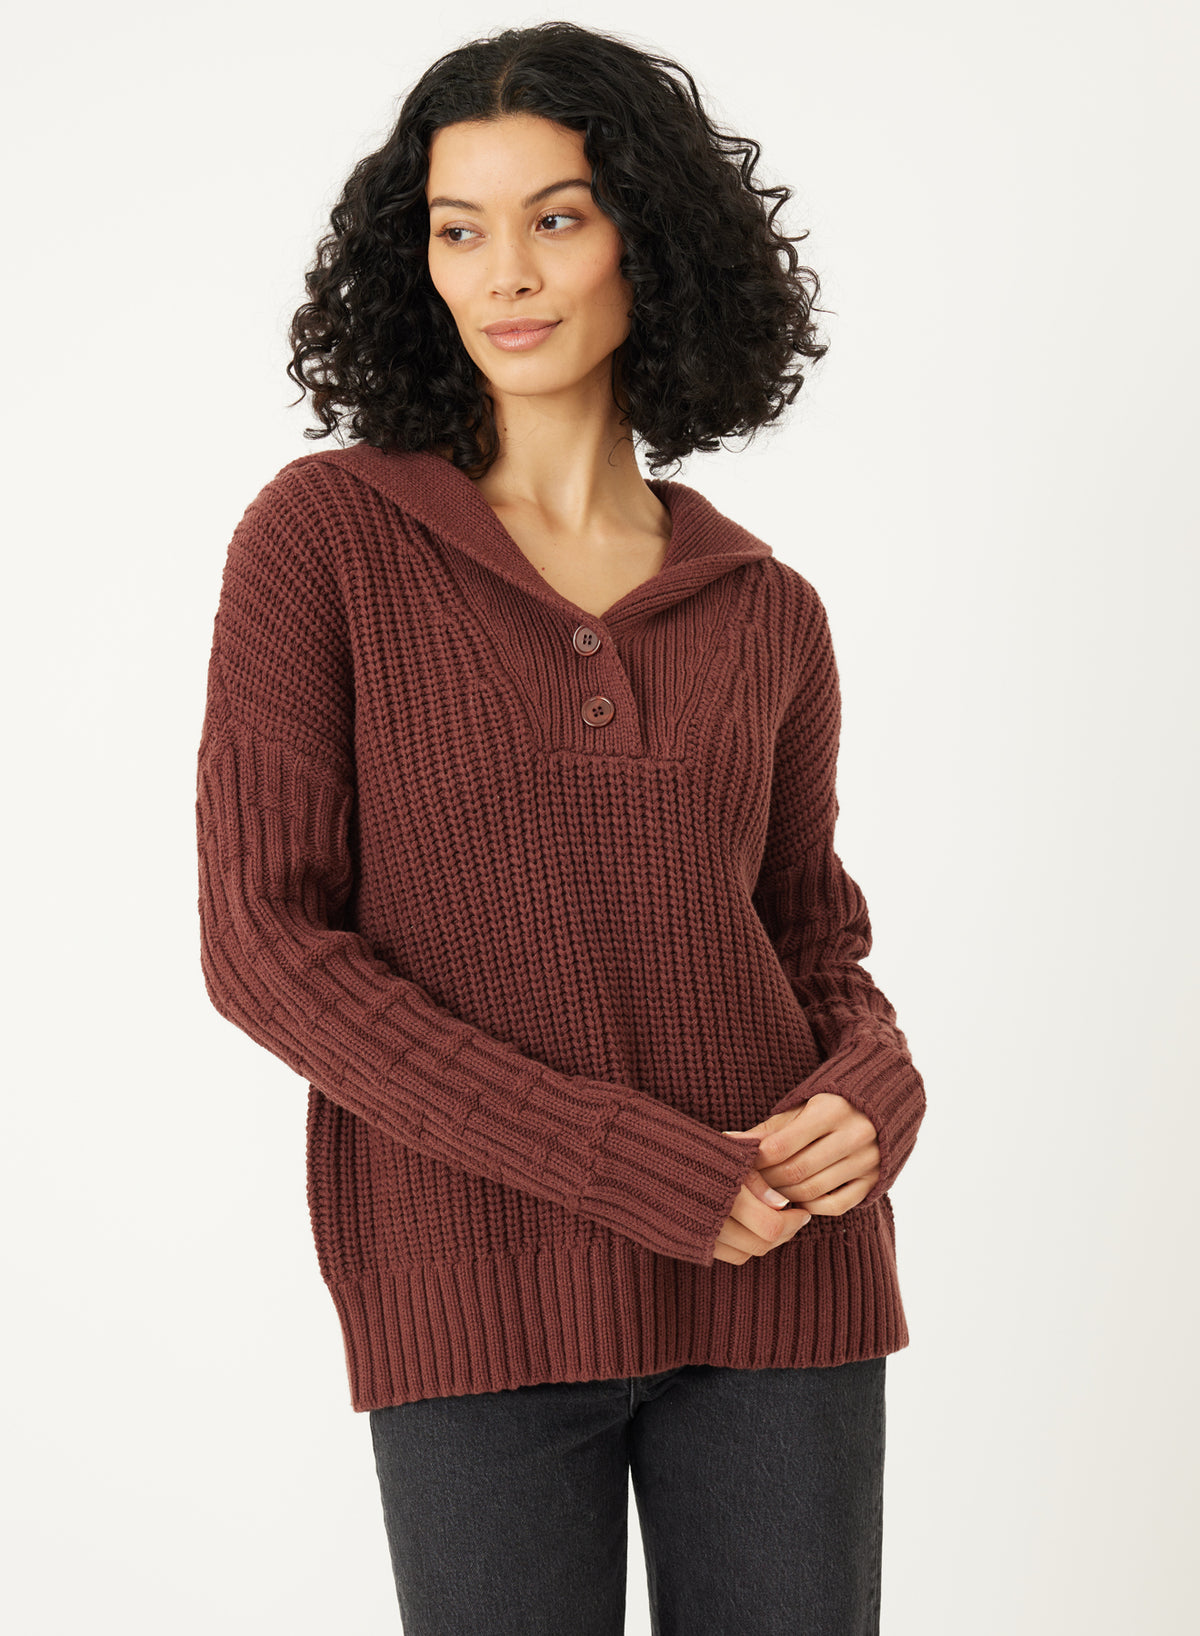 Stitches + Stripes Marlow Pullover